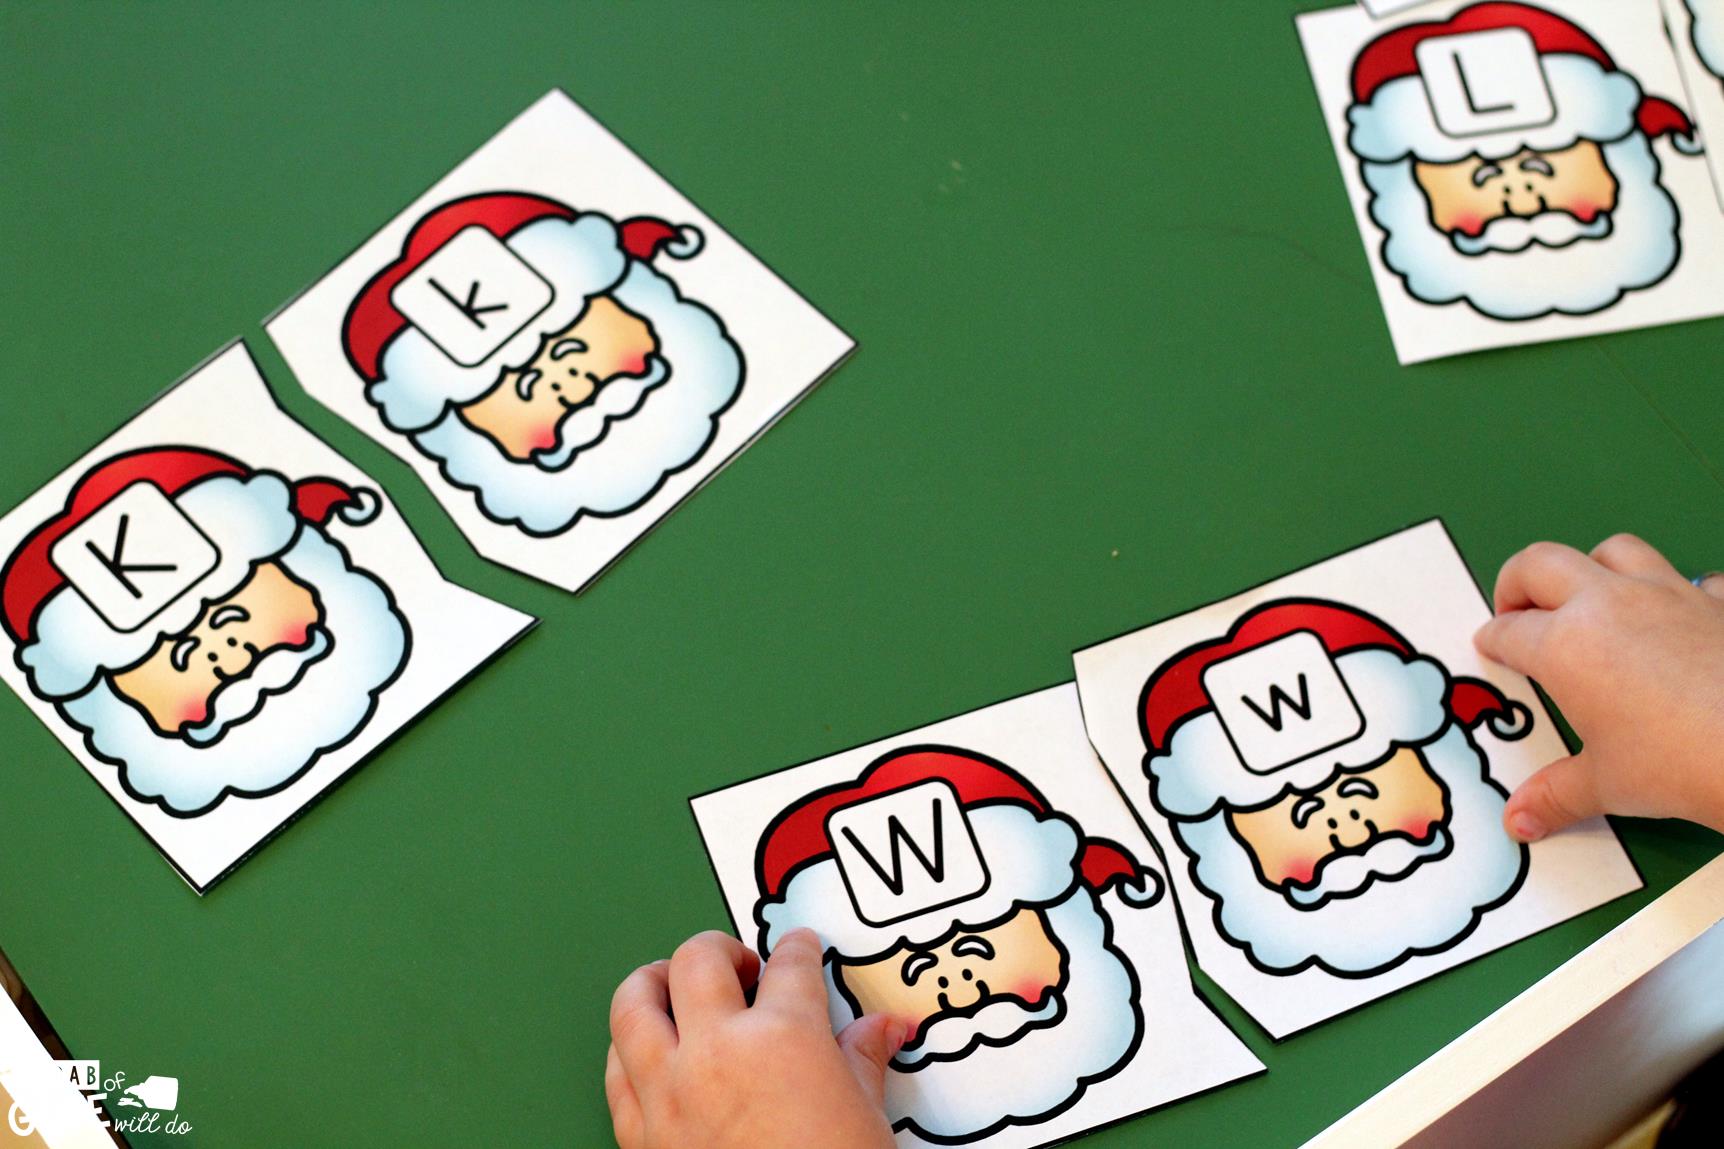 Santa Letter Puzzles is the perfect hands-on addition to literacy centers this Christmas and holiday season. This free printable is perfect for preschool and kindergarten students. 